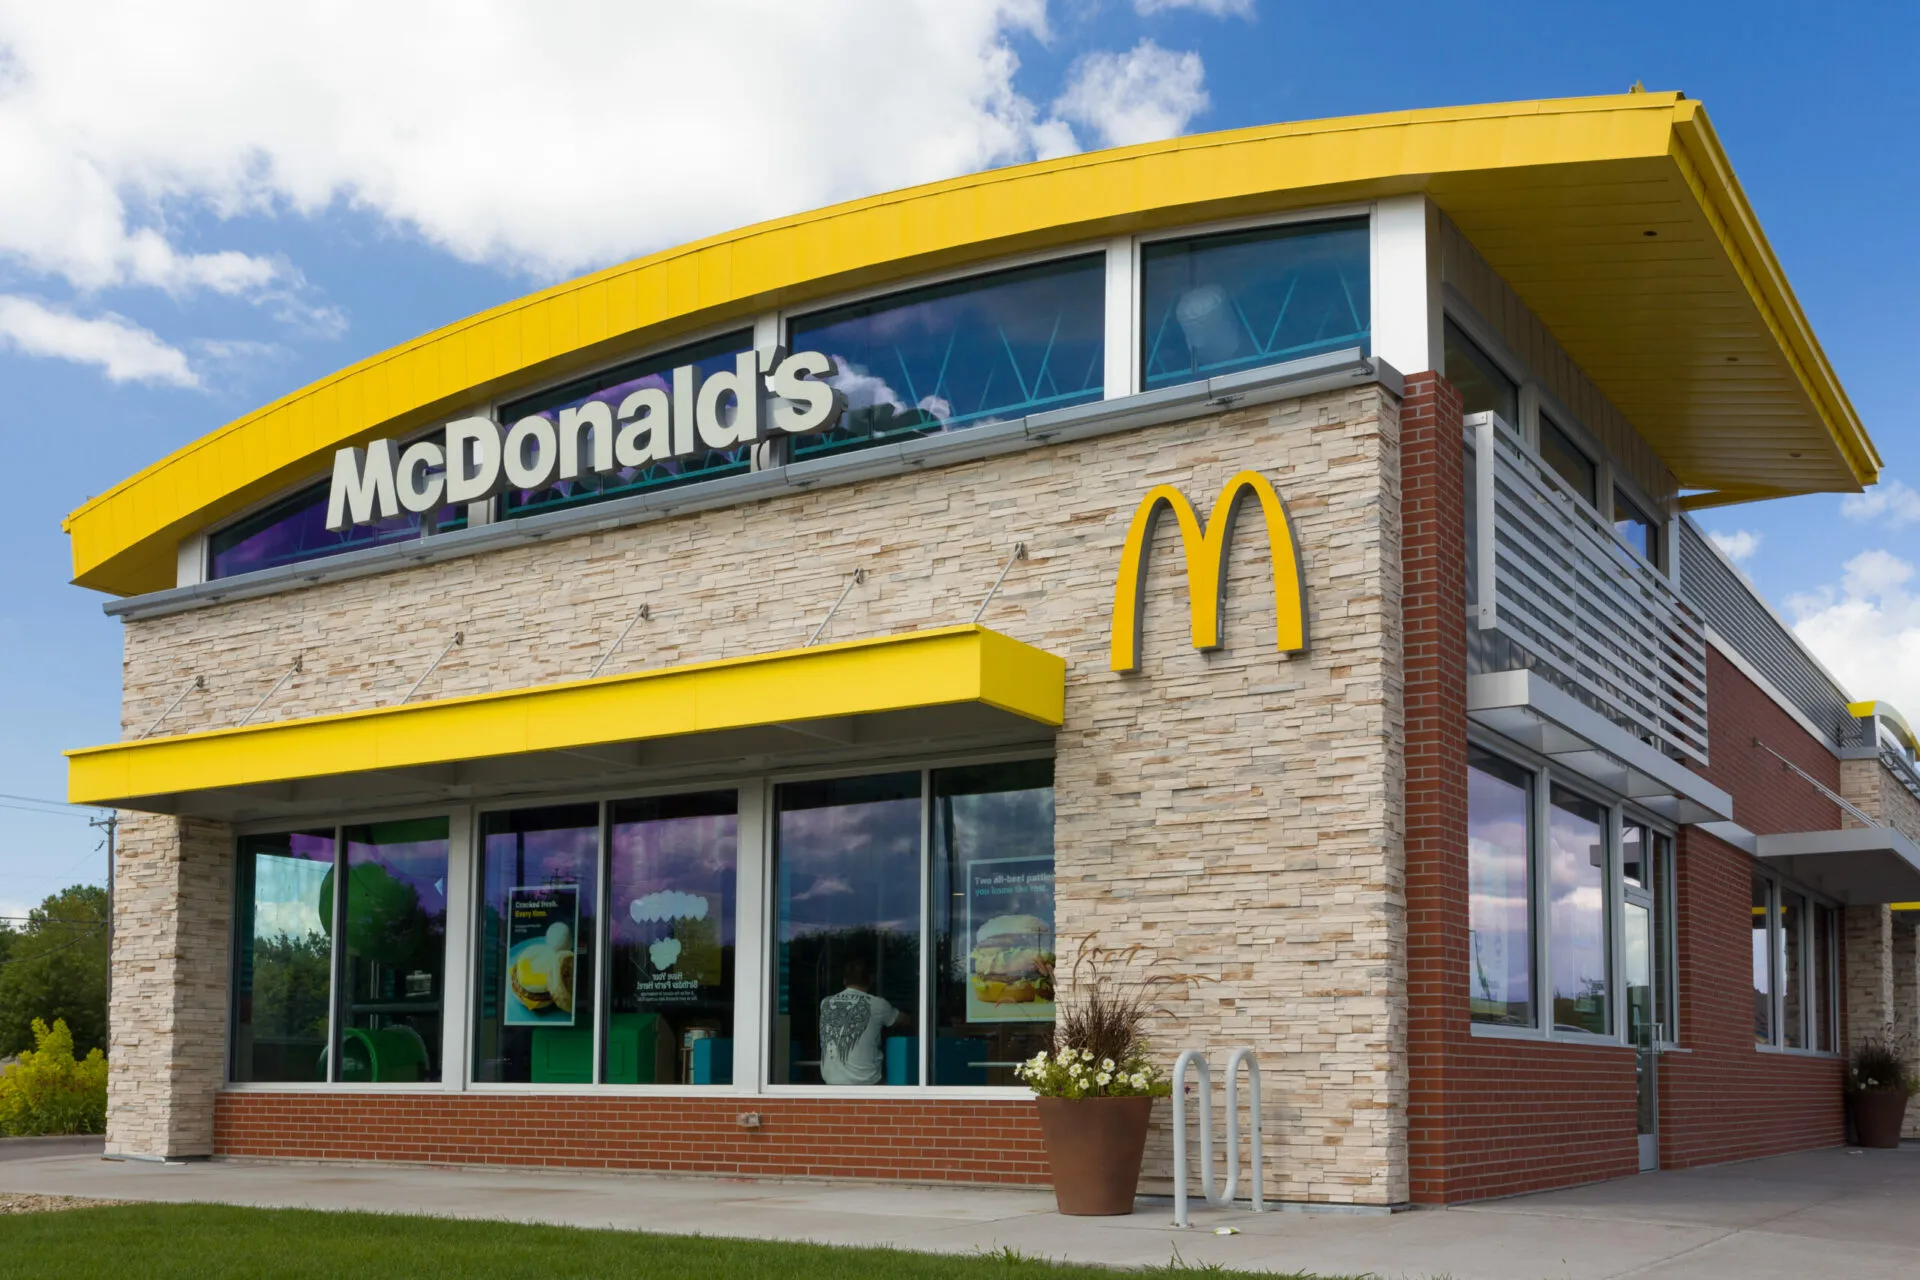 A mcdonald 's restaurant with yellow awnings and a blue sky.